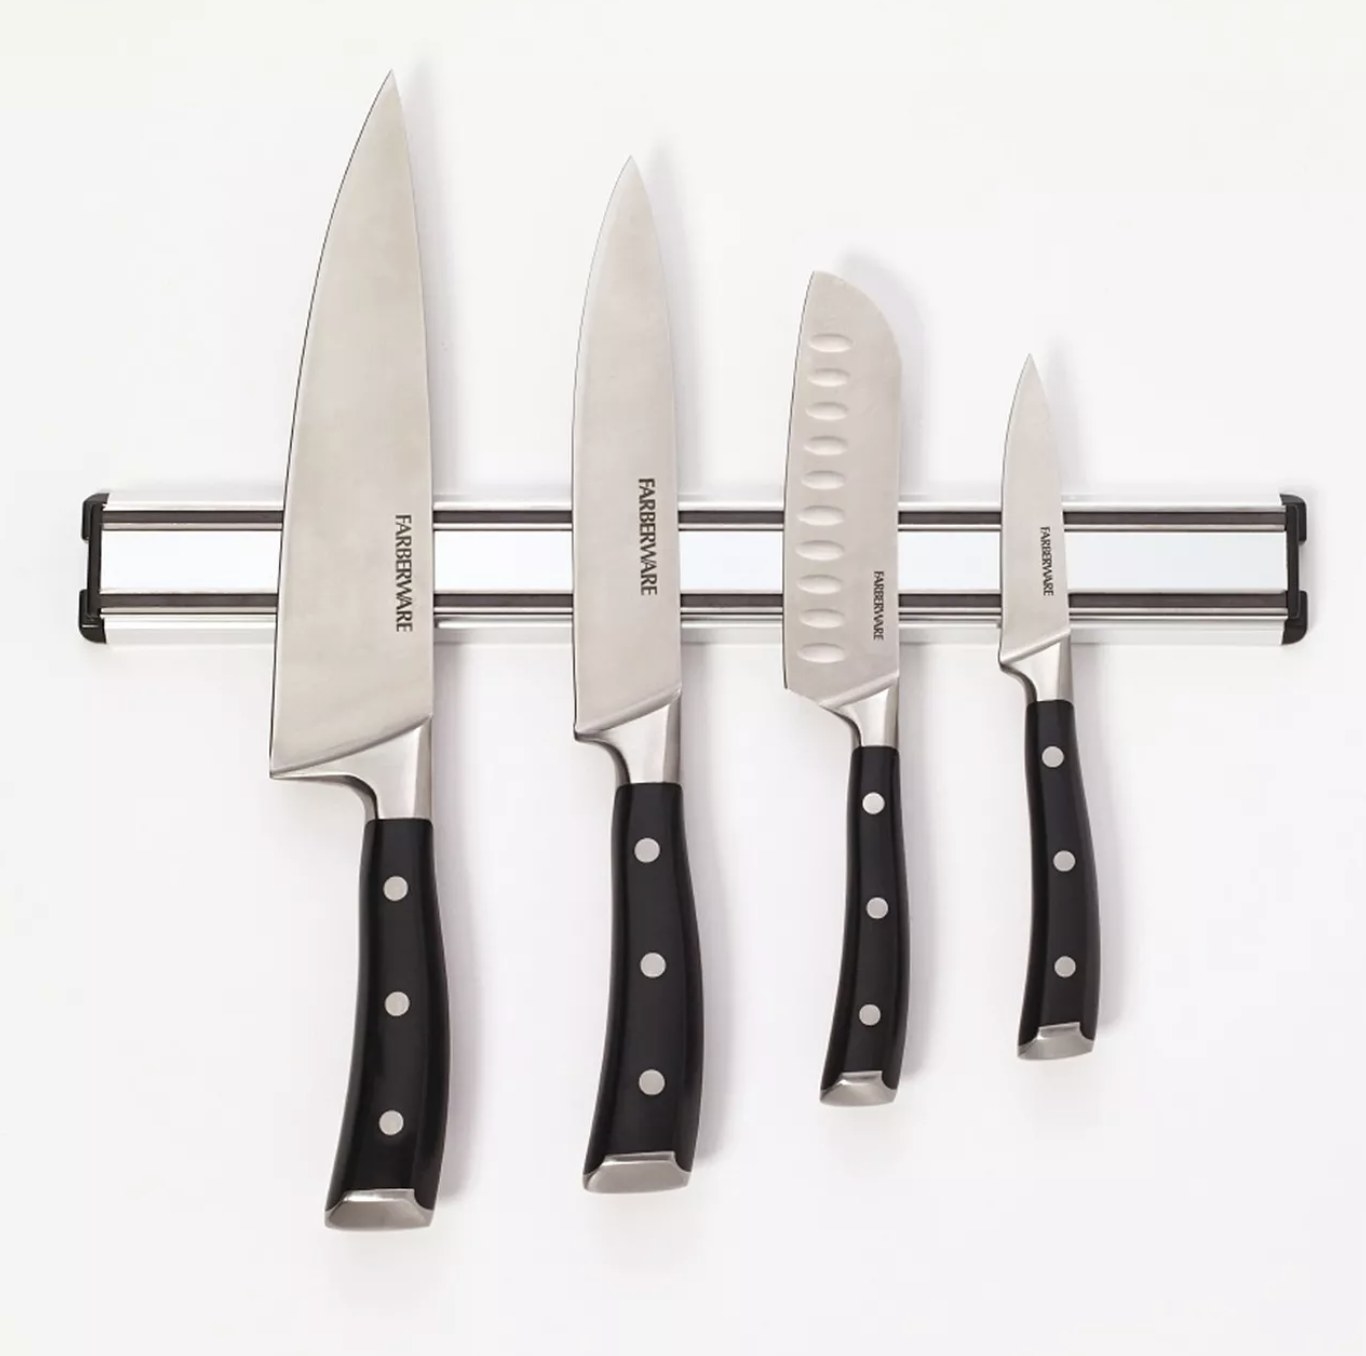 A set of four knives hanging on a magnetic strip